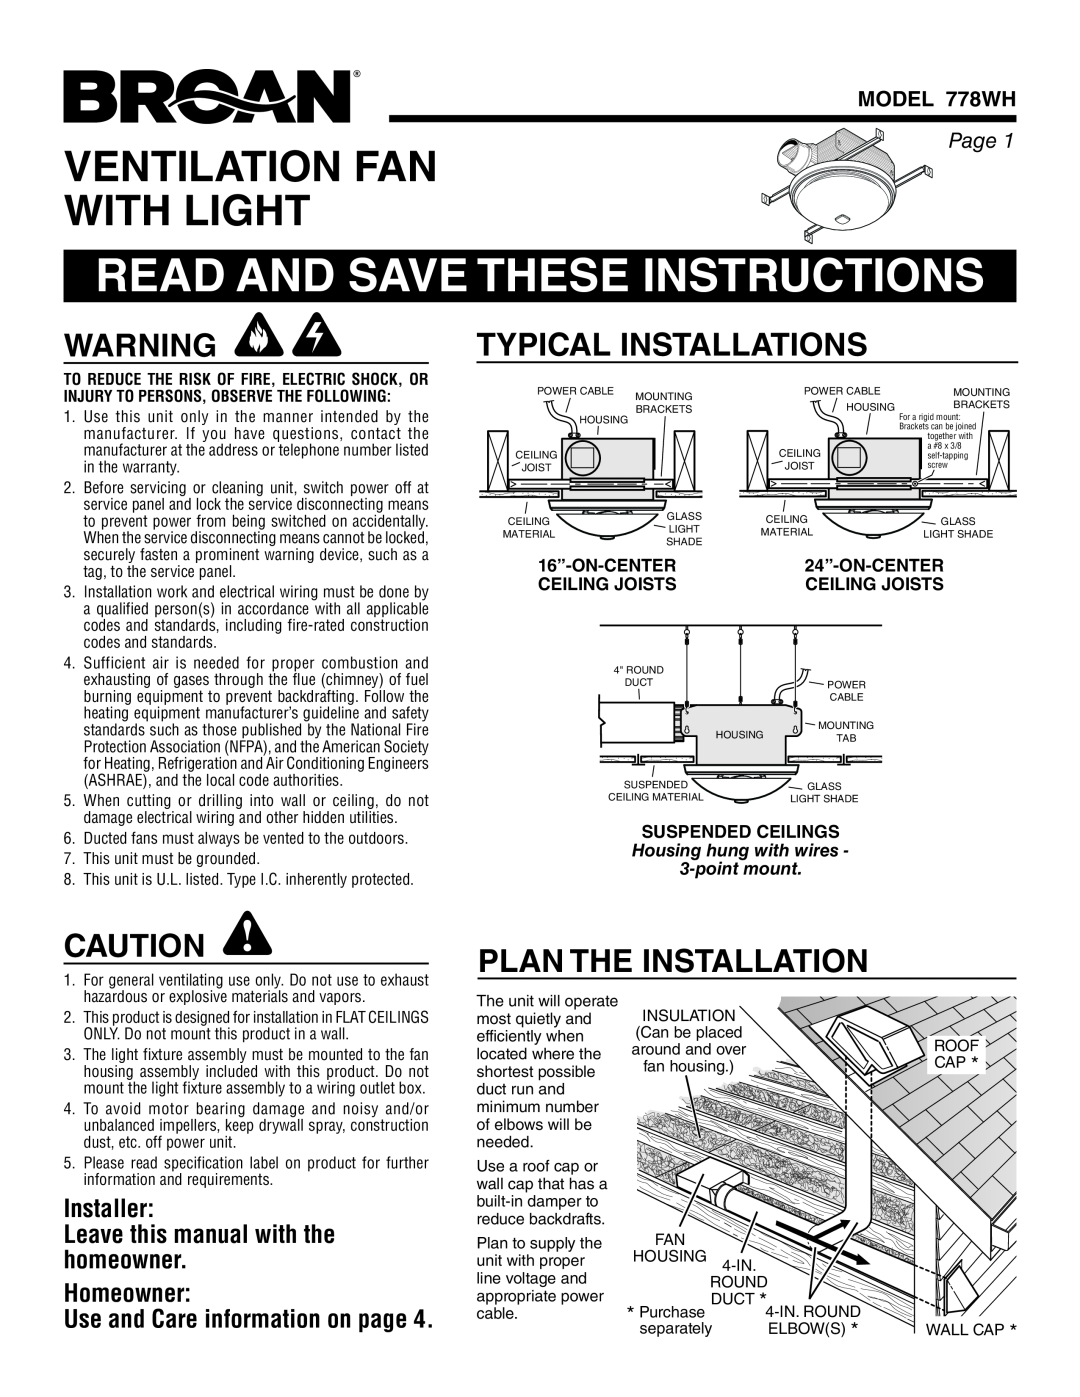 Broan warranty Read And Save These Instructions, Ventilation Fan With Light, Typical Installations, MODEL 778WH, Page 